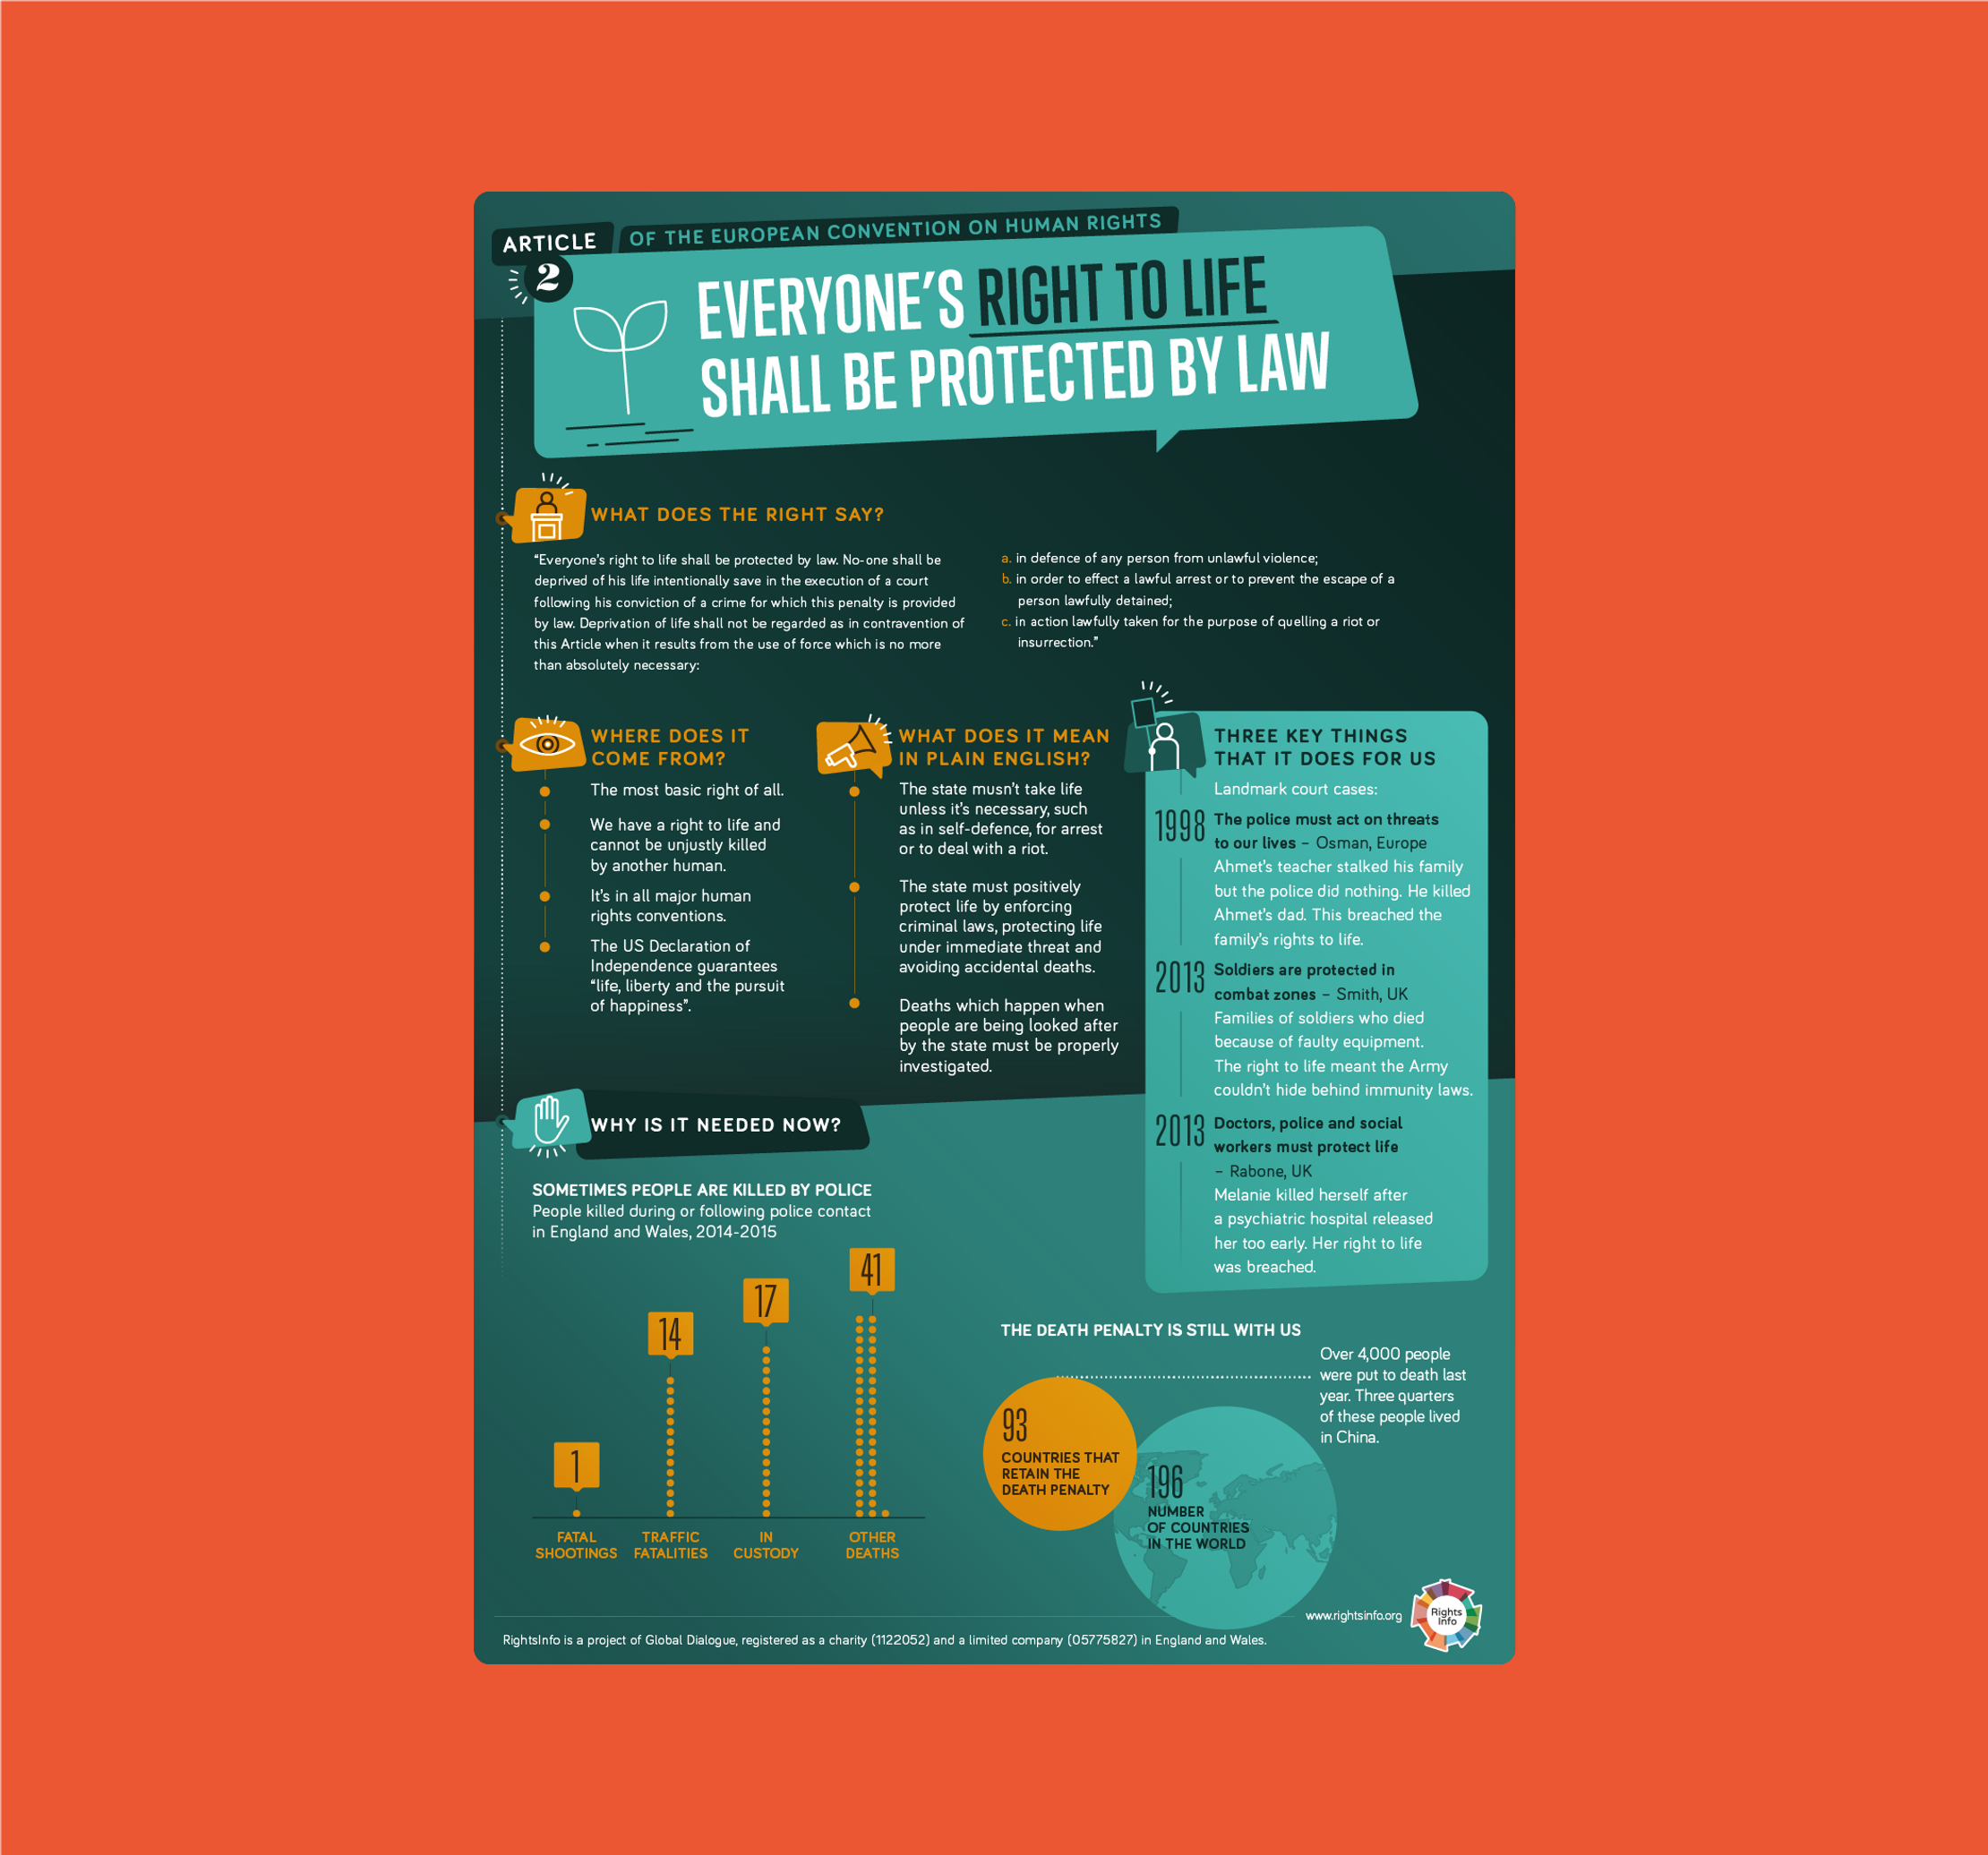 An illustrated and colourful poster that includes data visualizatioons and copy explaining everyone's right to life and its protection under law.